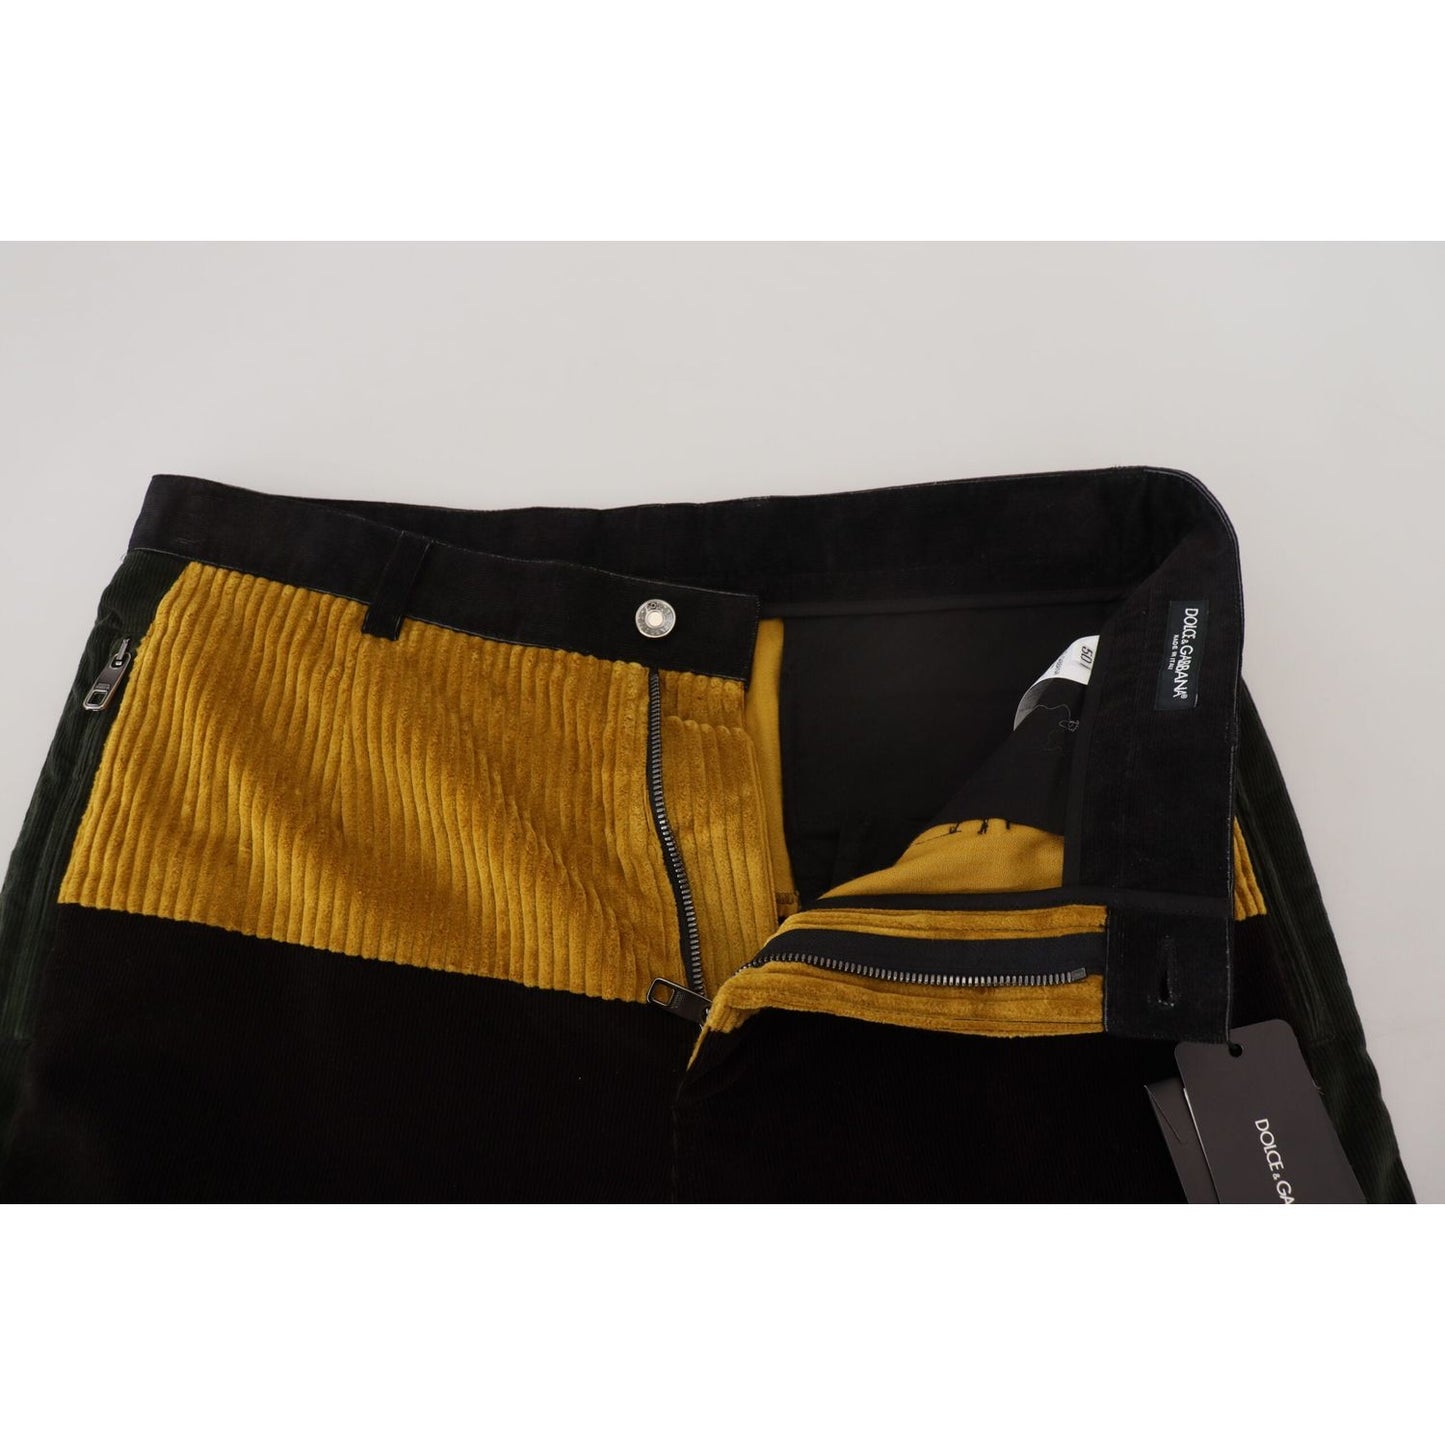 Dolce & GabbanaElegant Black Tapered Trousers with Yellow AccentMcRichard Designer Brands£629.00